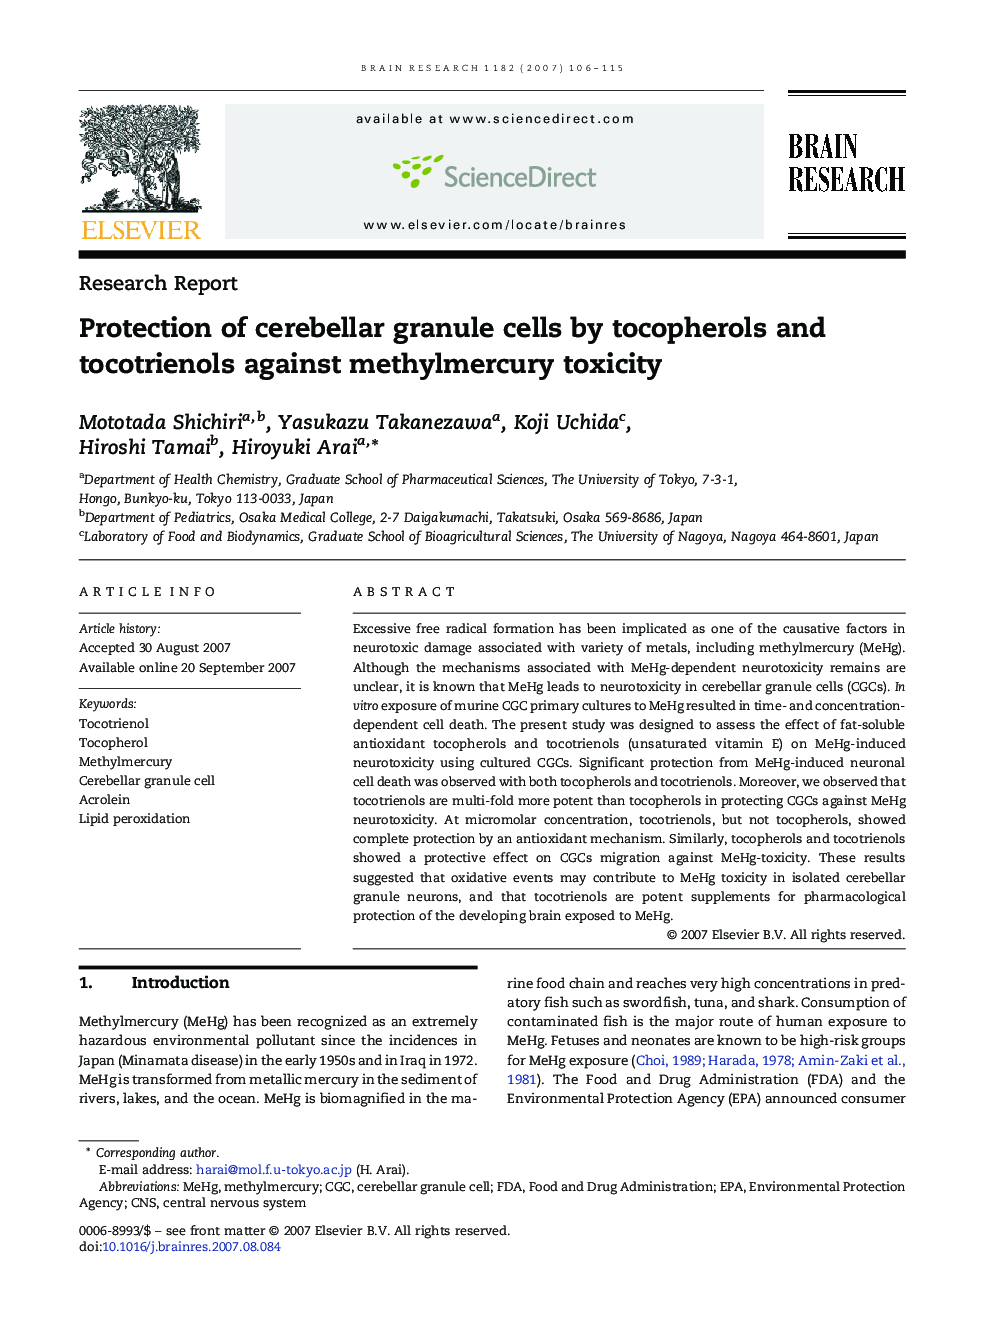 Protection of cerebellar granule cells by tocopherols and tocotrienols against methylmercury toxicity